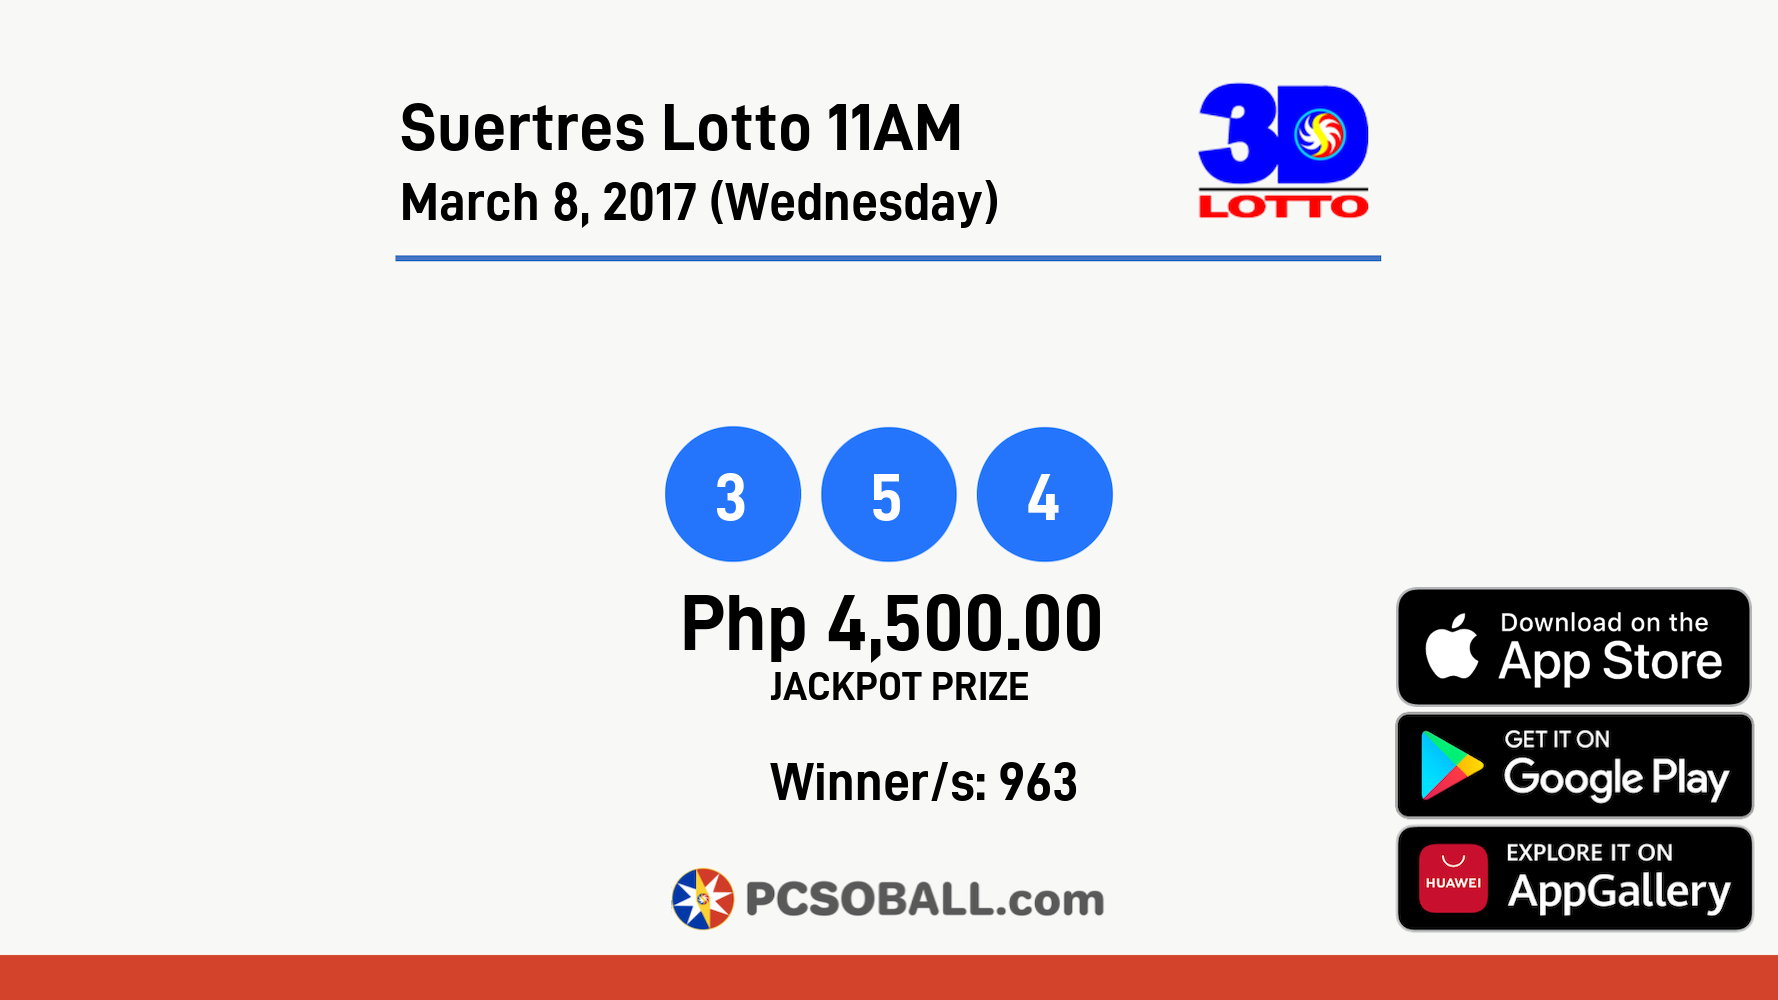 Suertres Lotto 11AM March 8, 2017 (Wednesday) Result